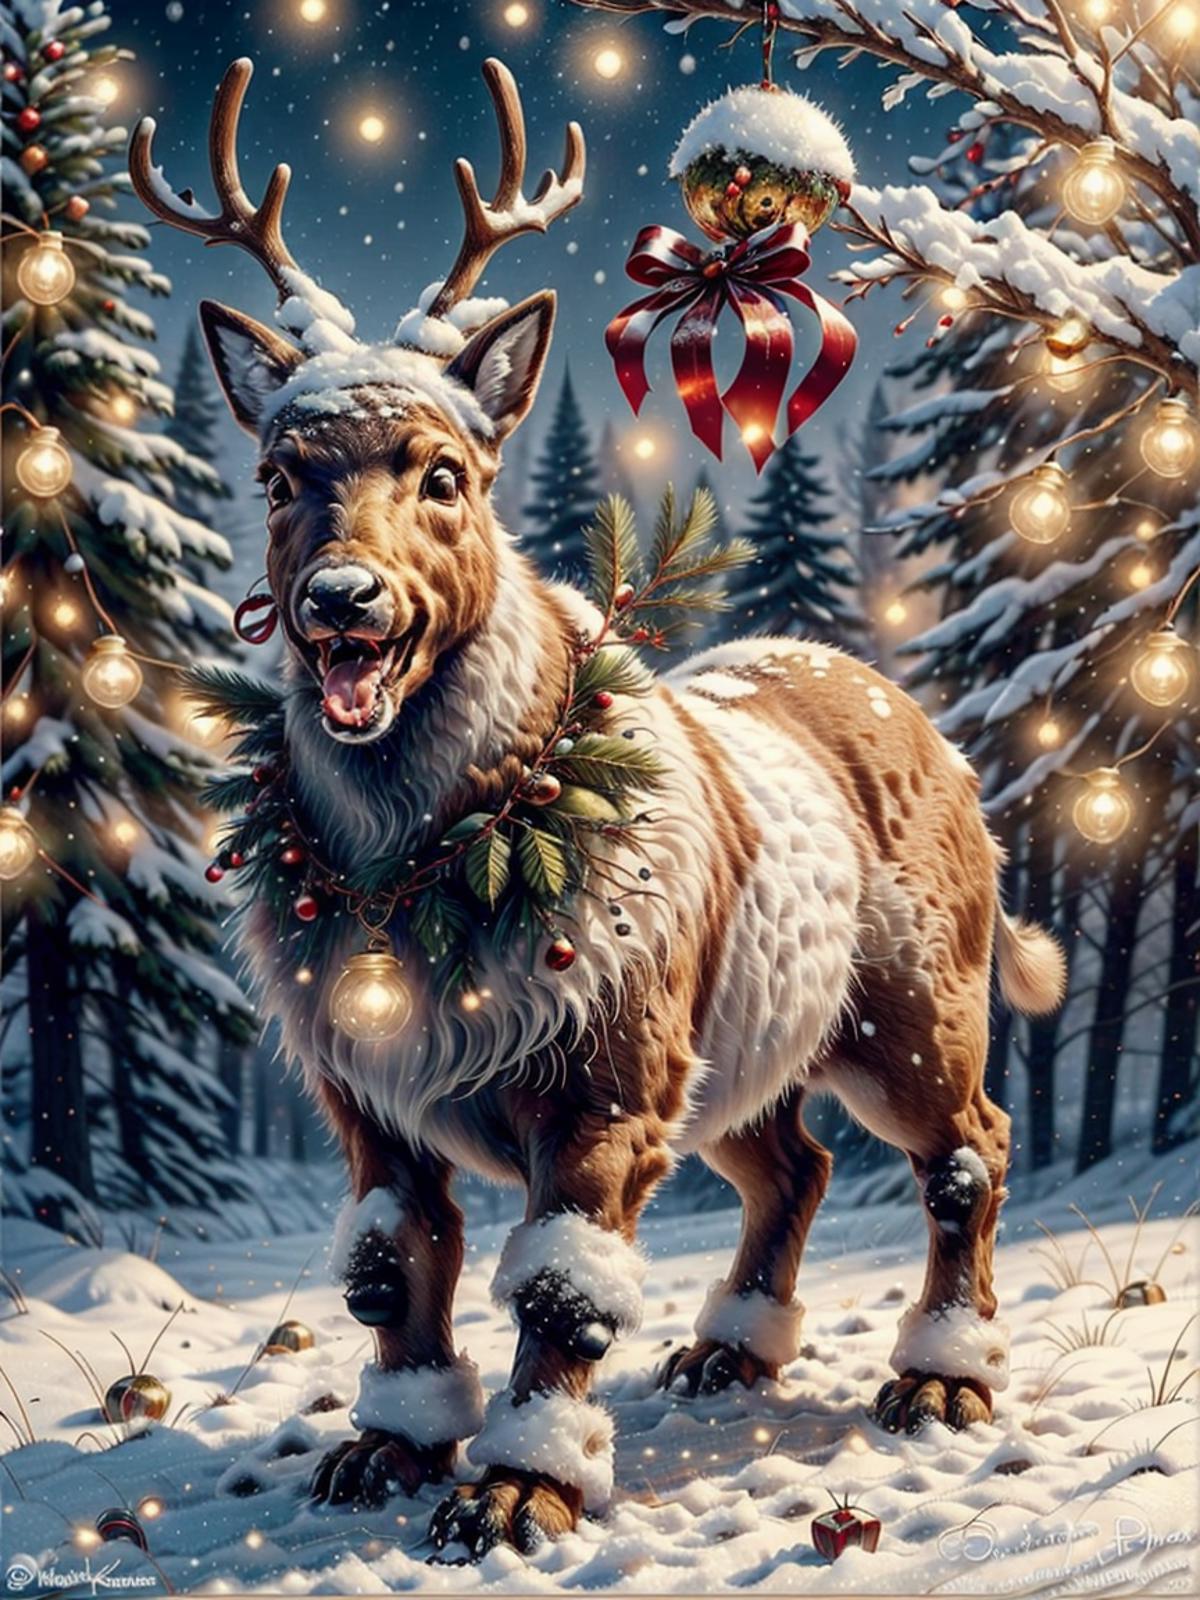 A snowy Christmas scene with a reindeer wearing a wreath around its neck.